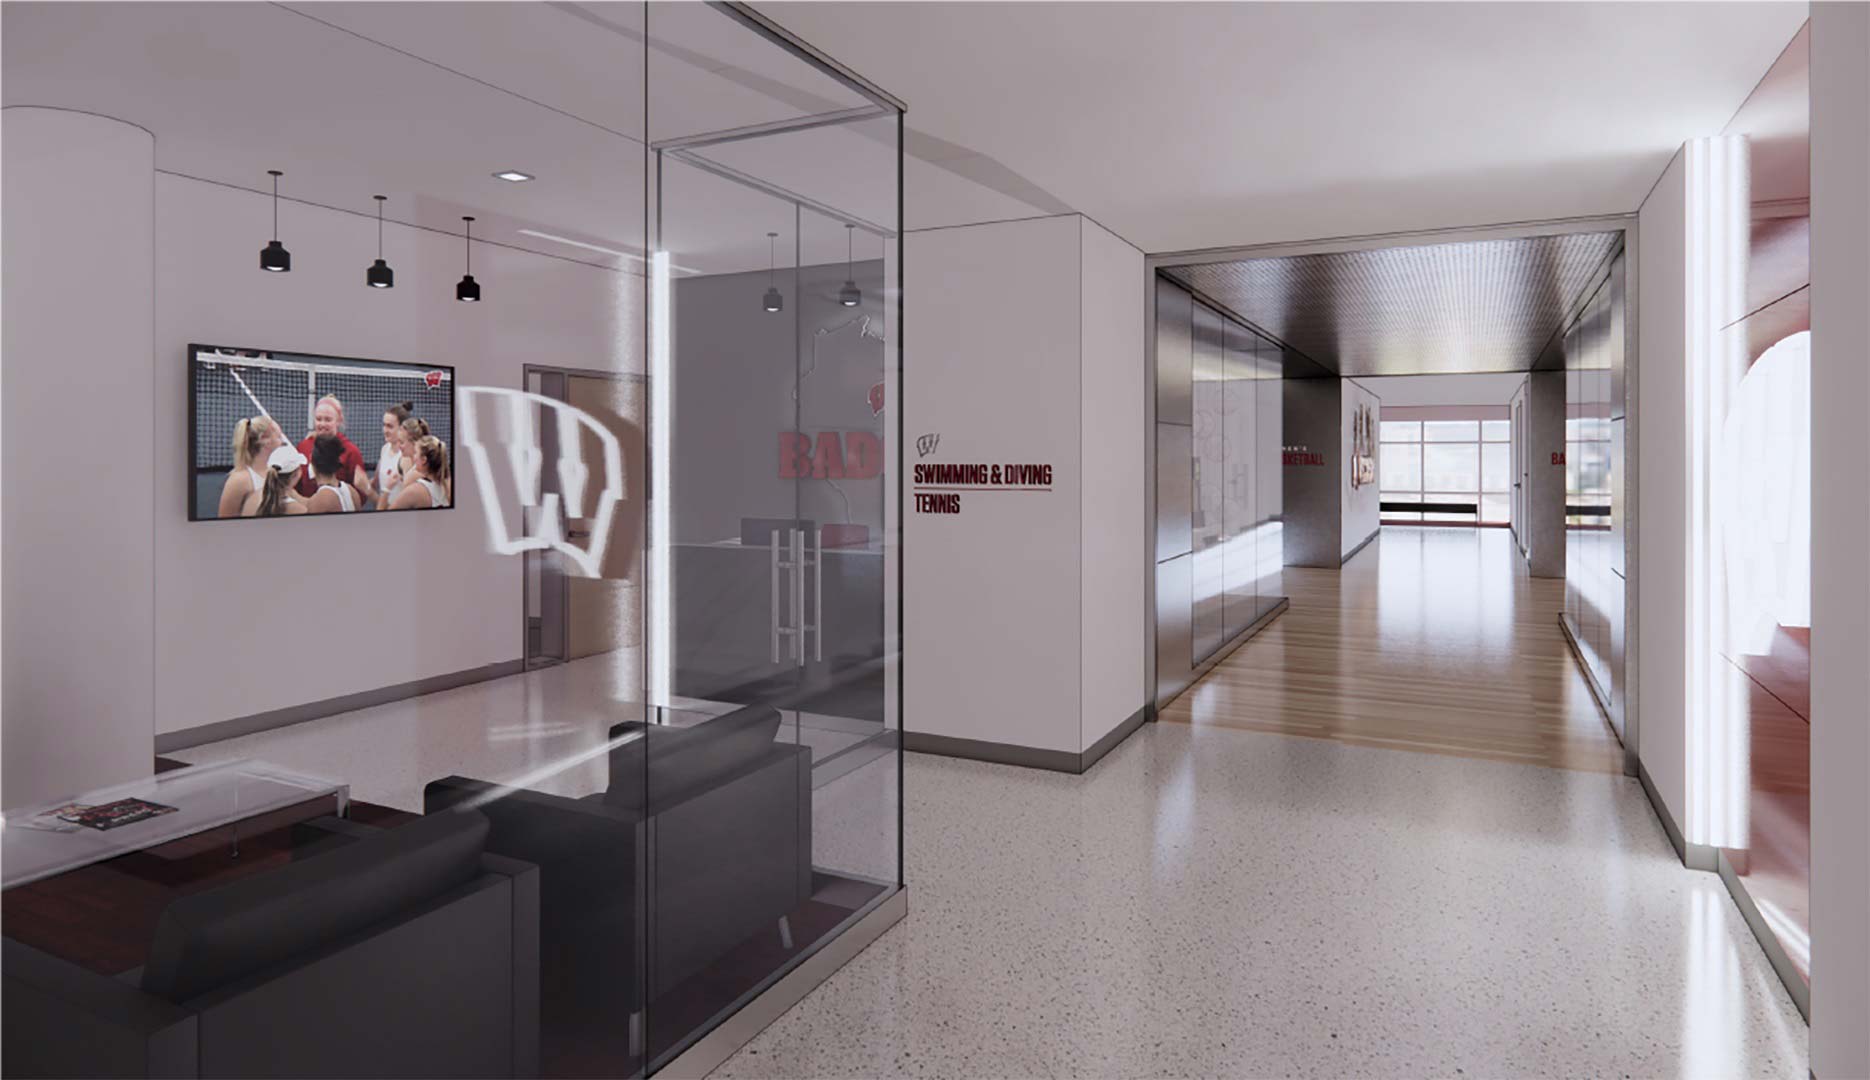 A rendering of an interior area of a hallway with a glassed in that has black chairs and a TV on the wall.